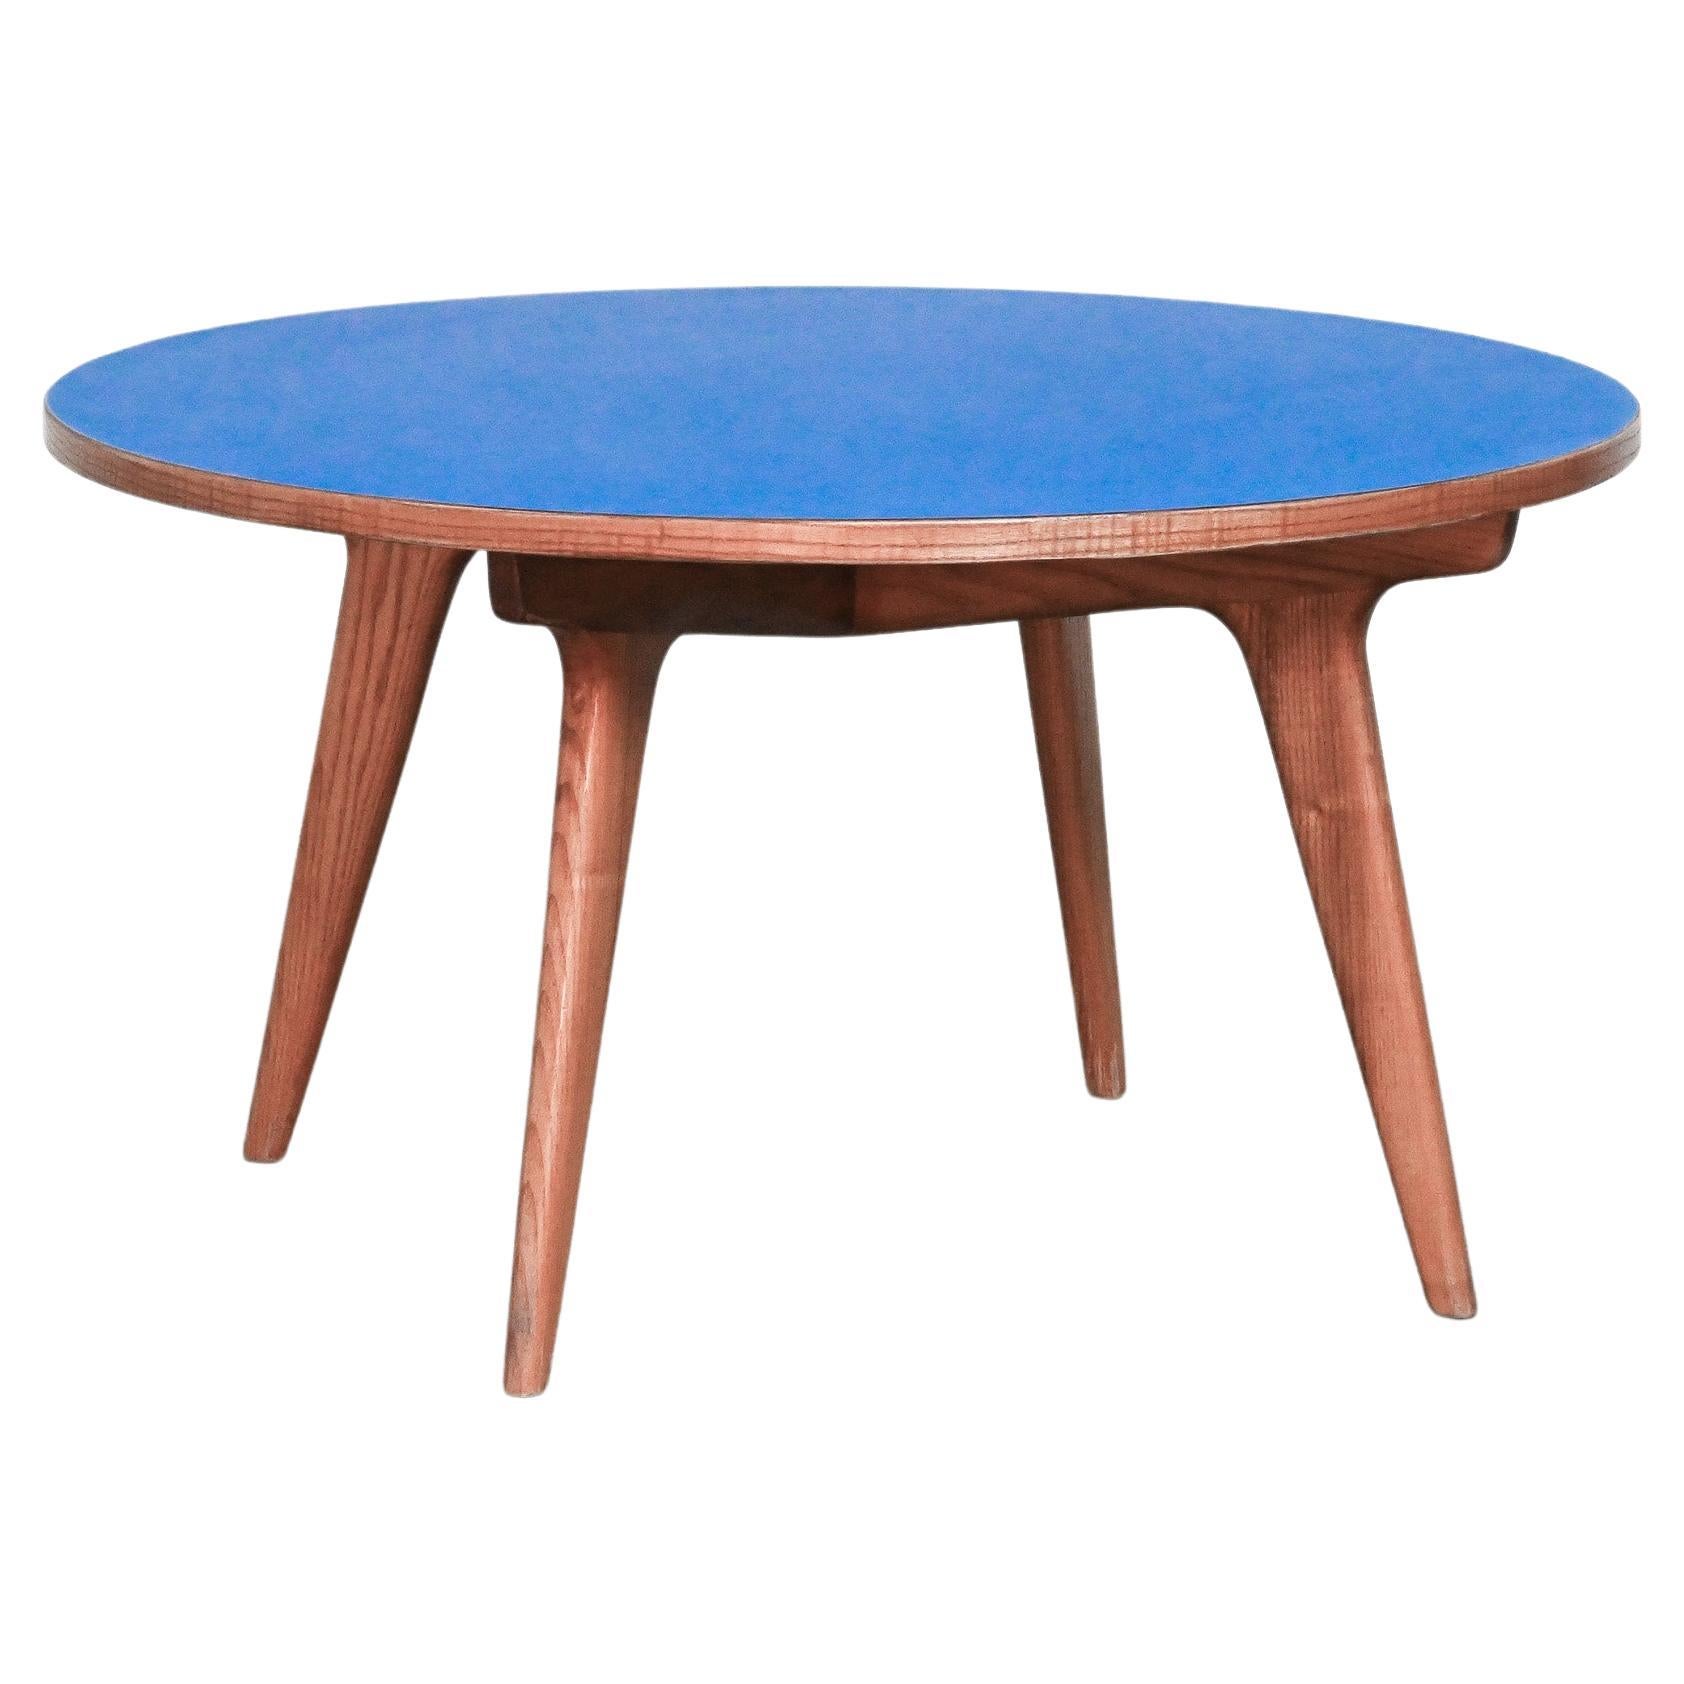 Gio Ponti style Maple and Laminate Circular Low Table